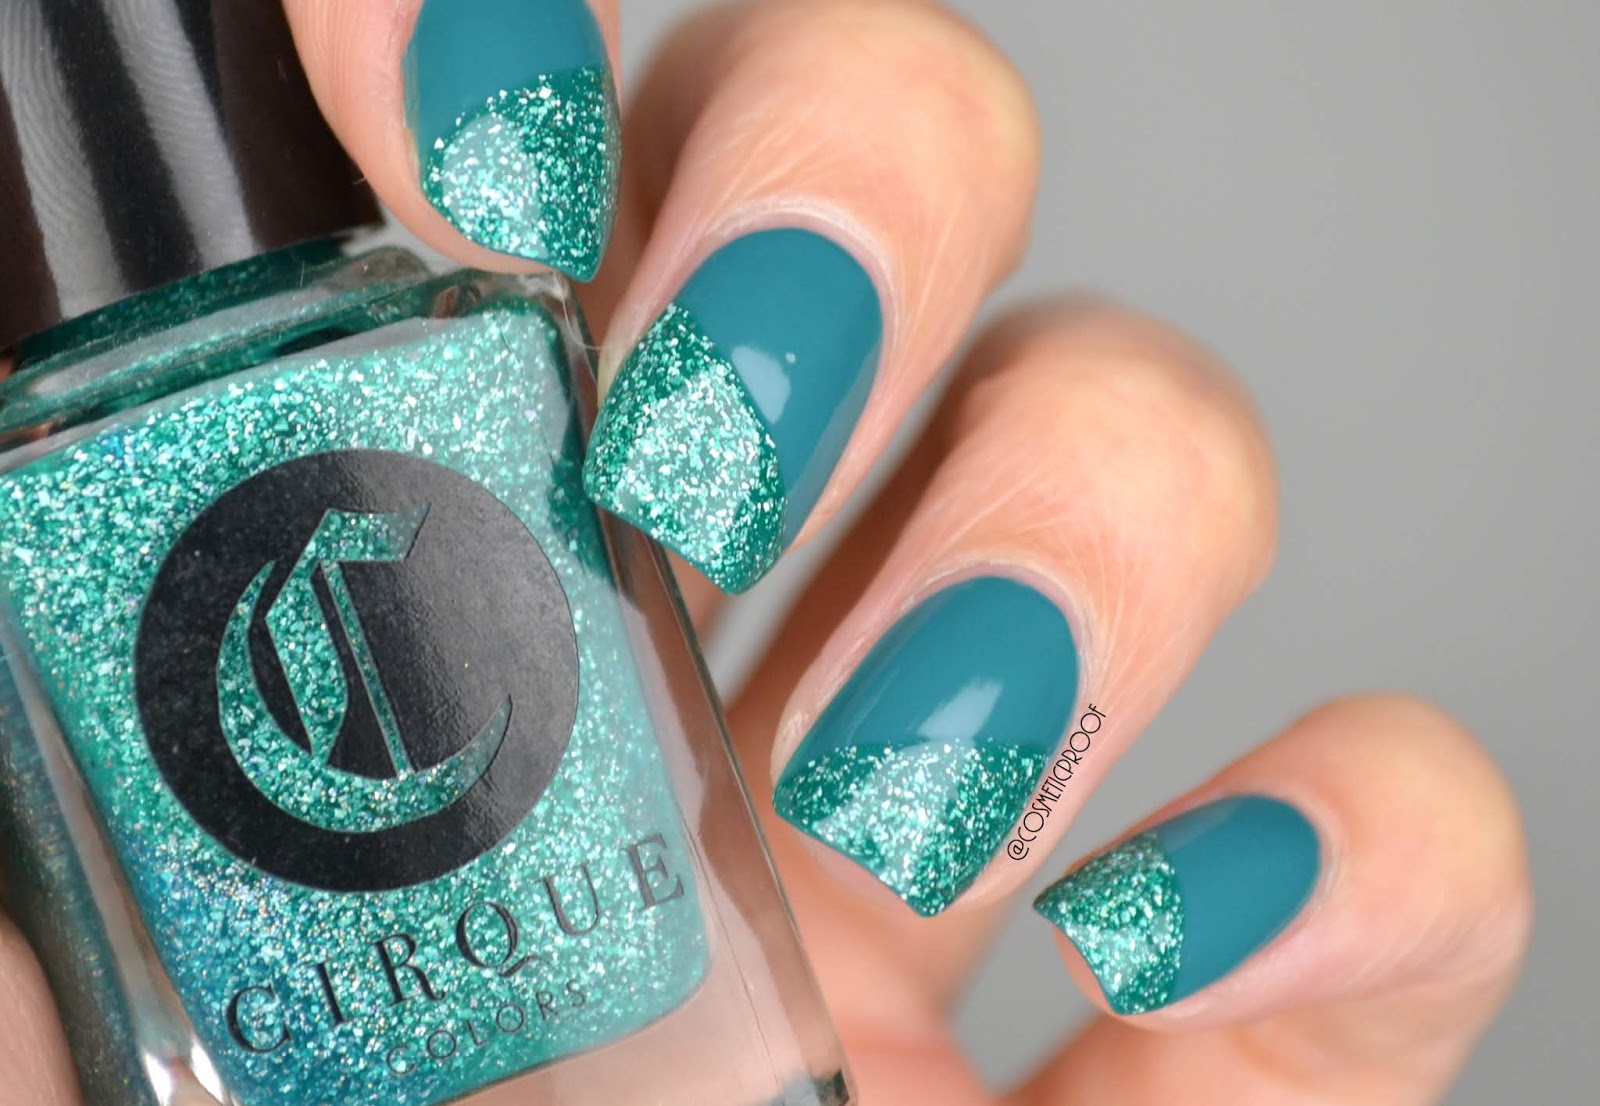 Teal and Glitter SNS Nail Design - wide 4